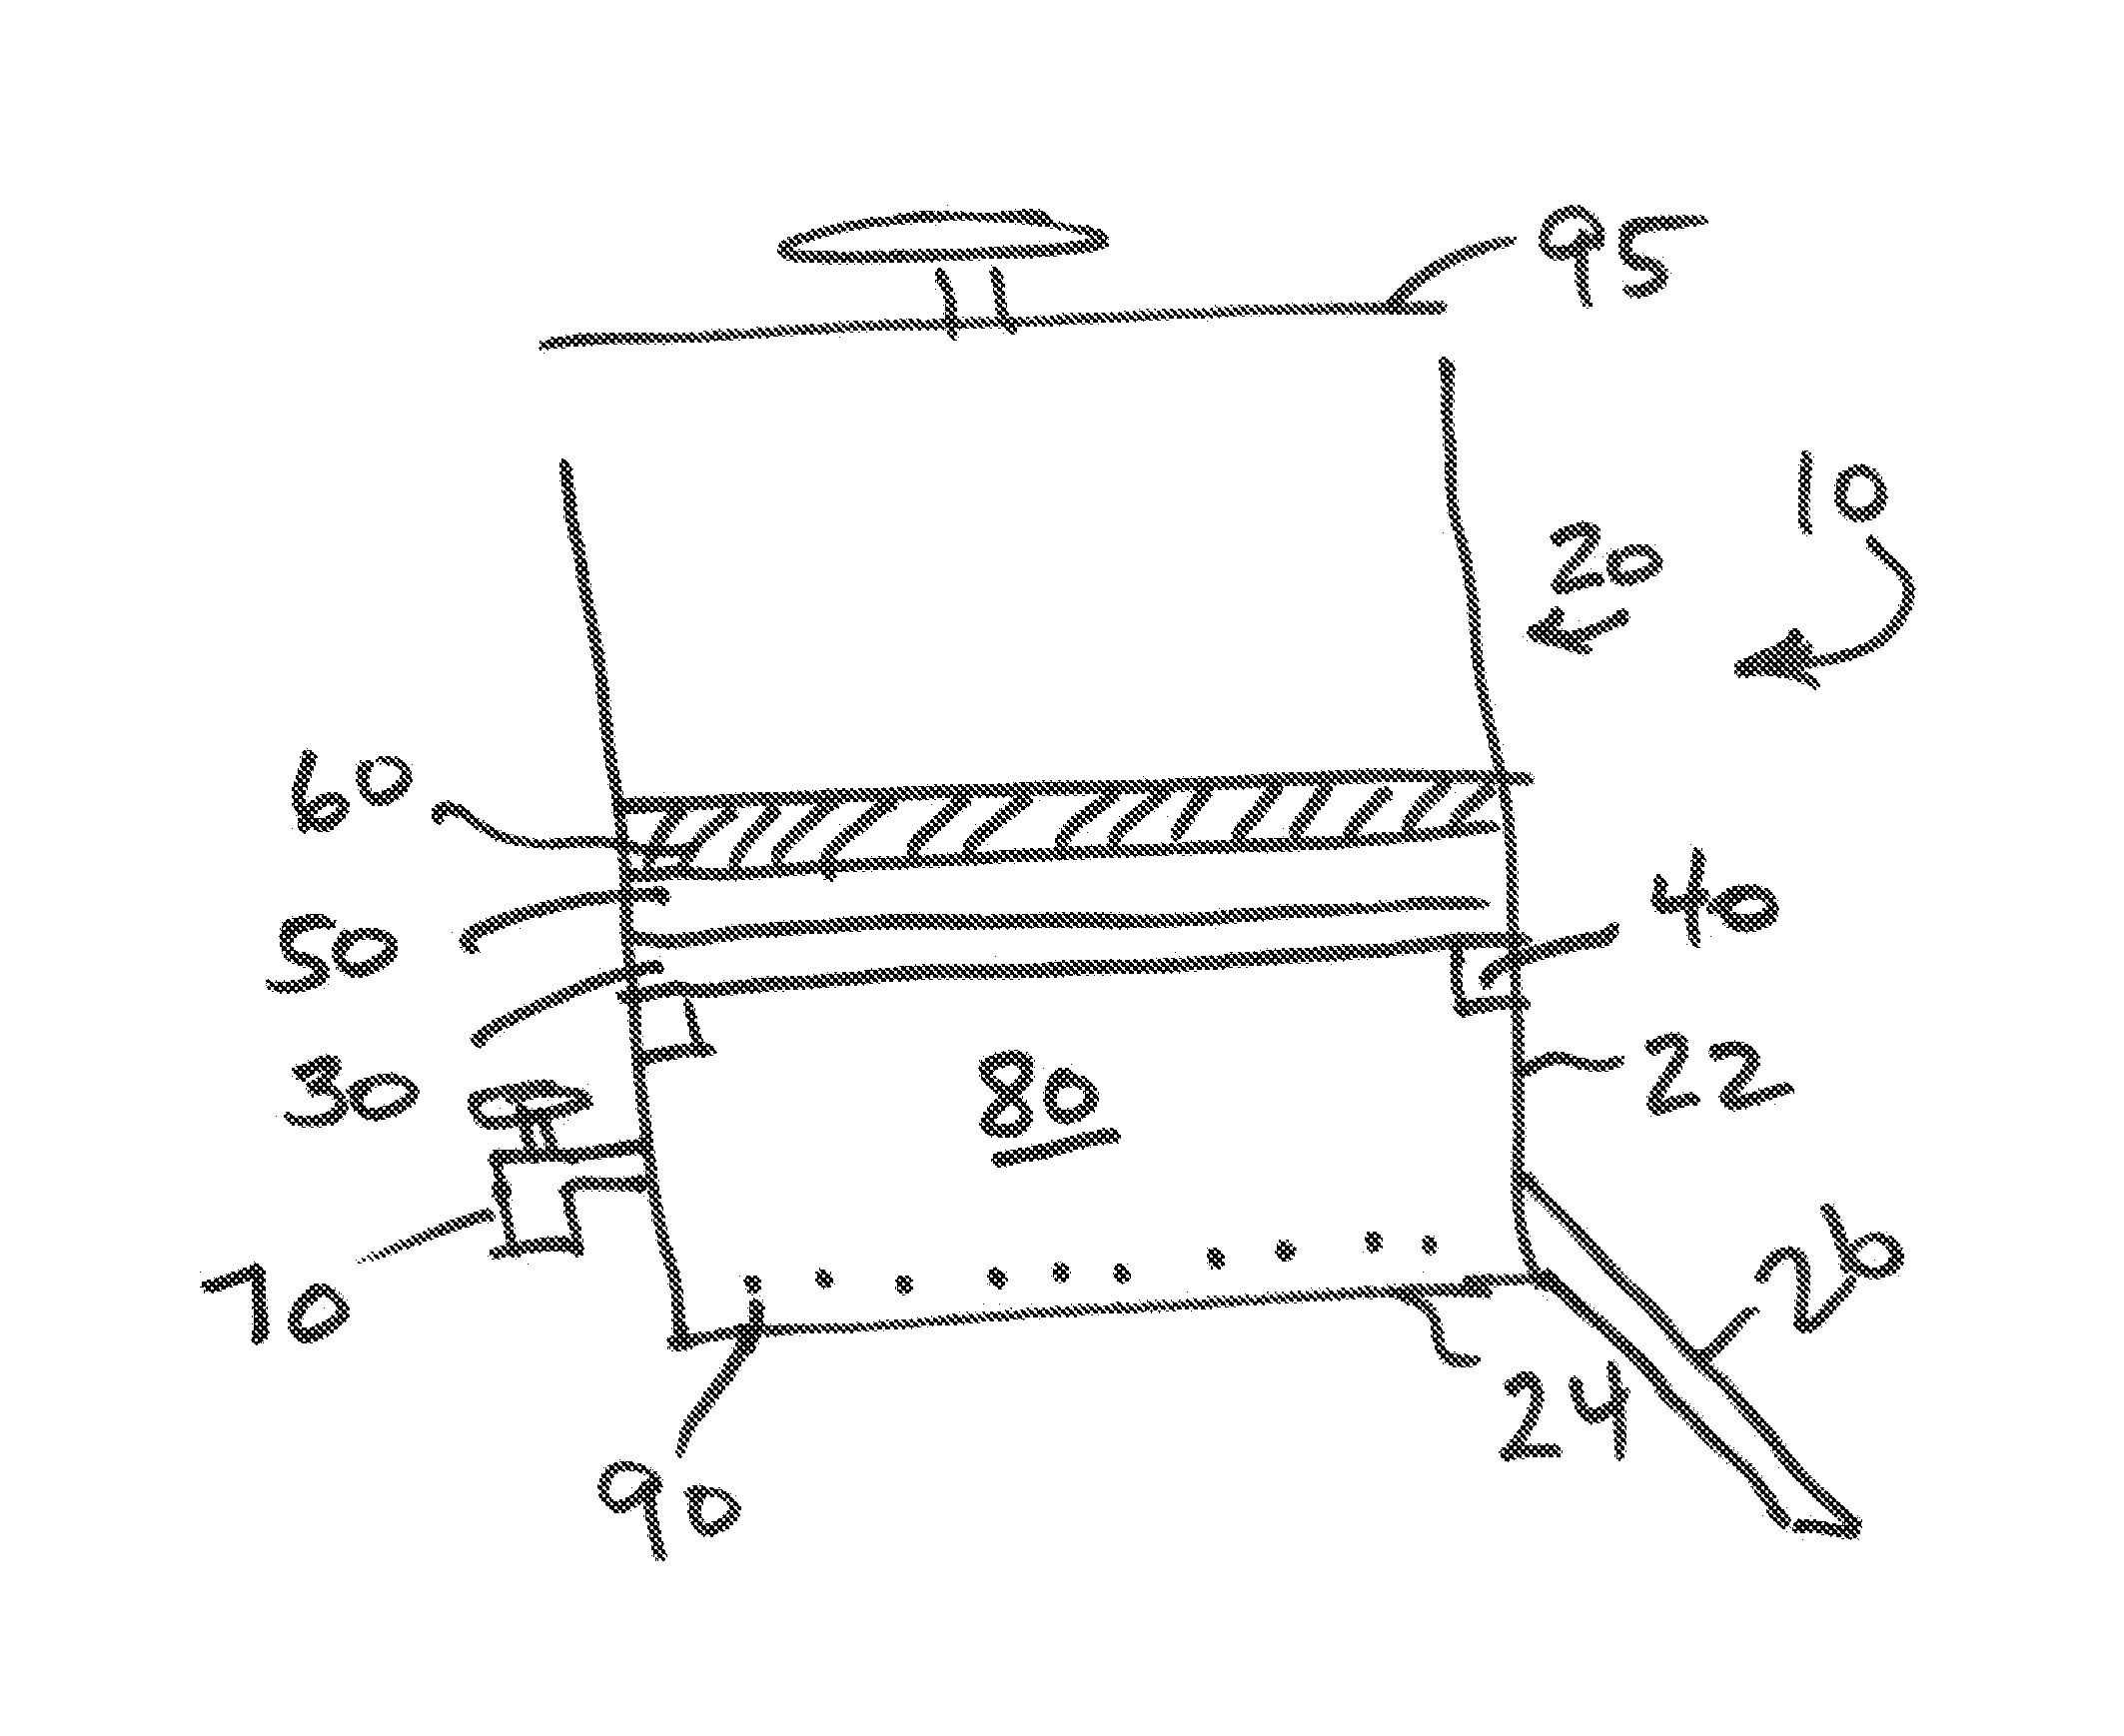 Cold coffee brewing device and methods thereof